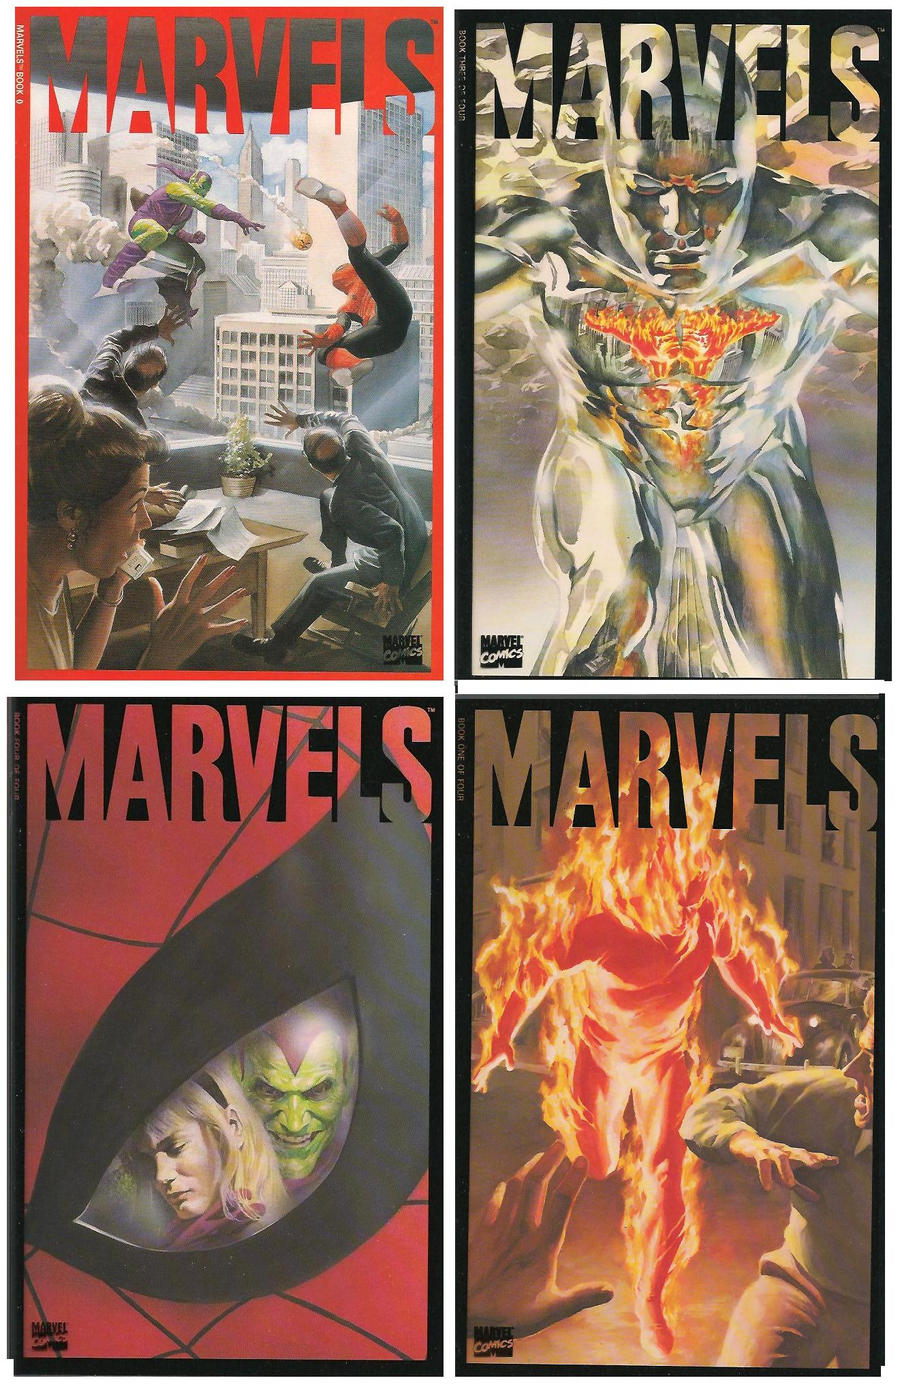 1994_marvels_covers_0_4_by_alex_ross_by_